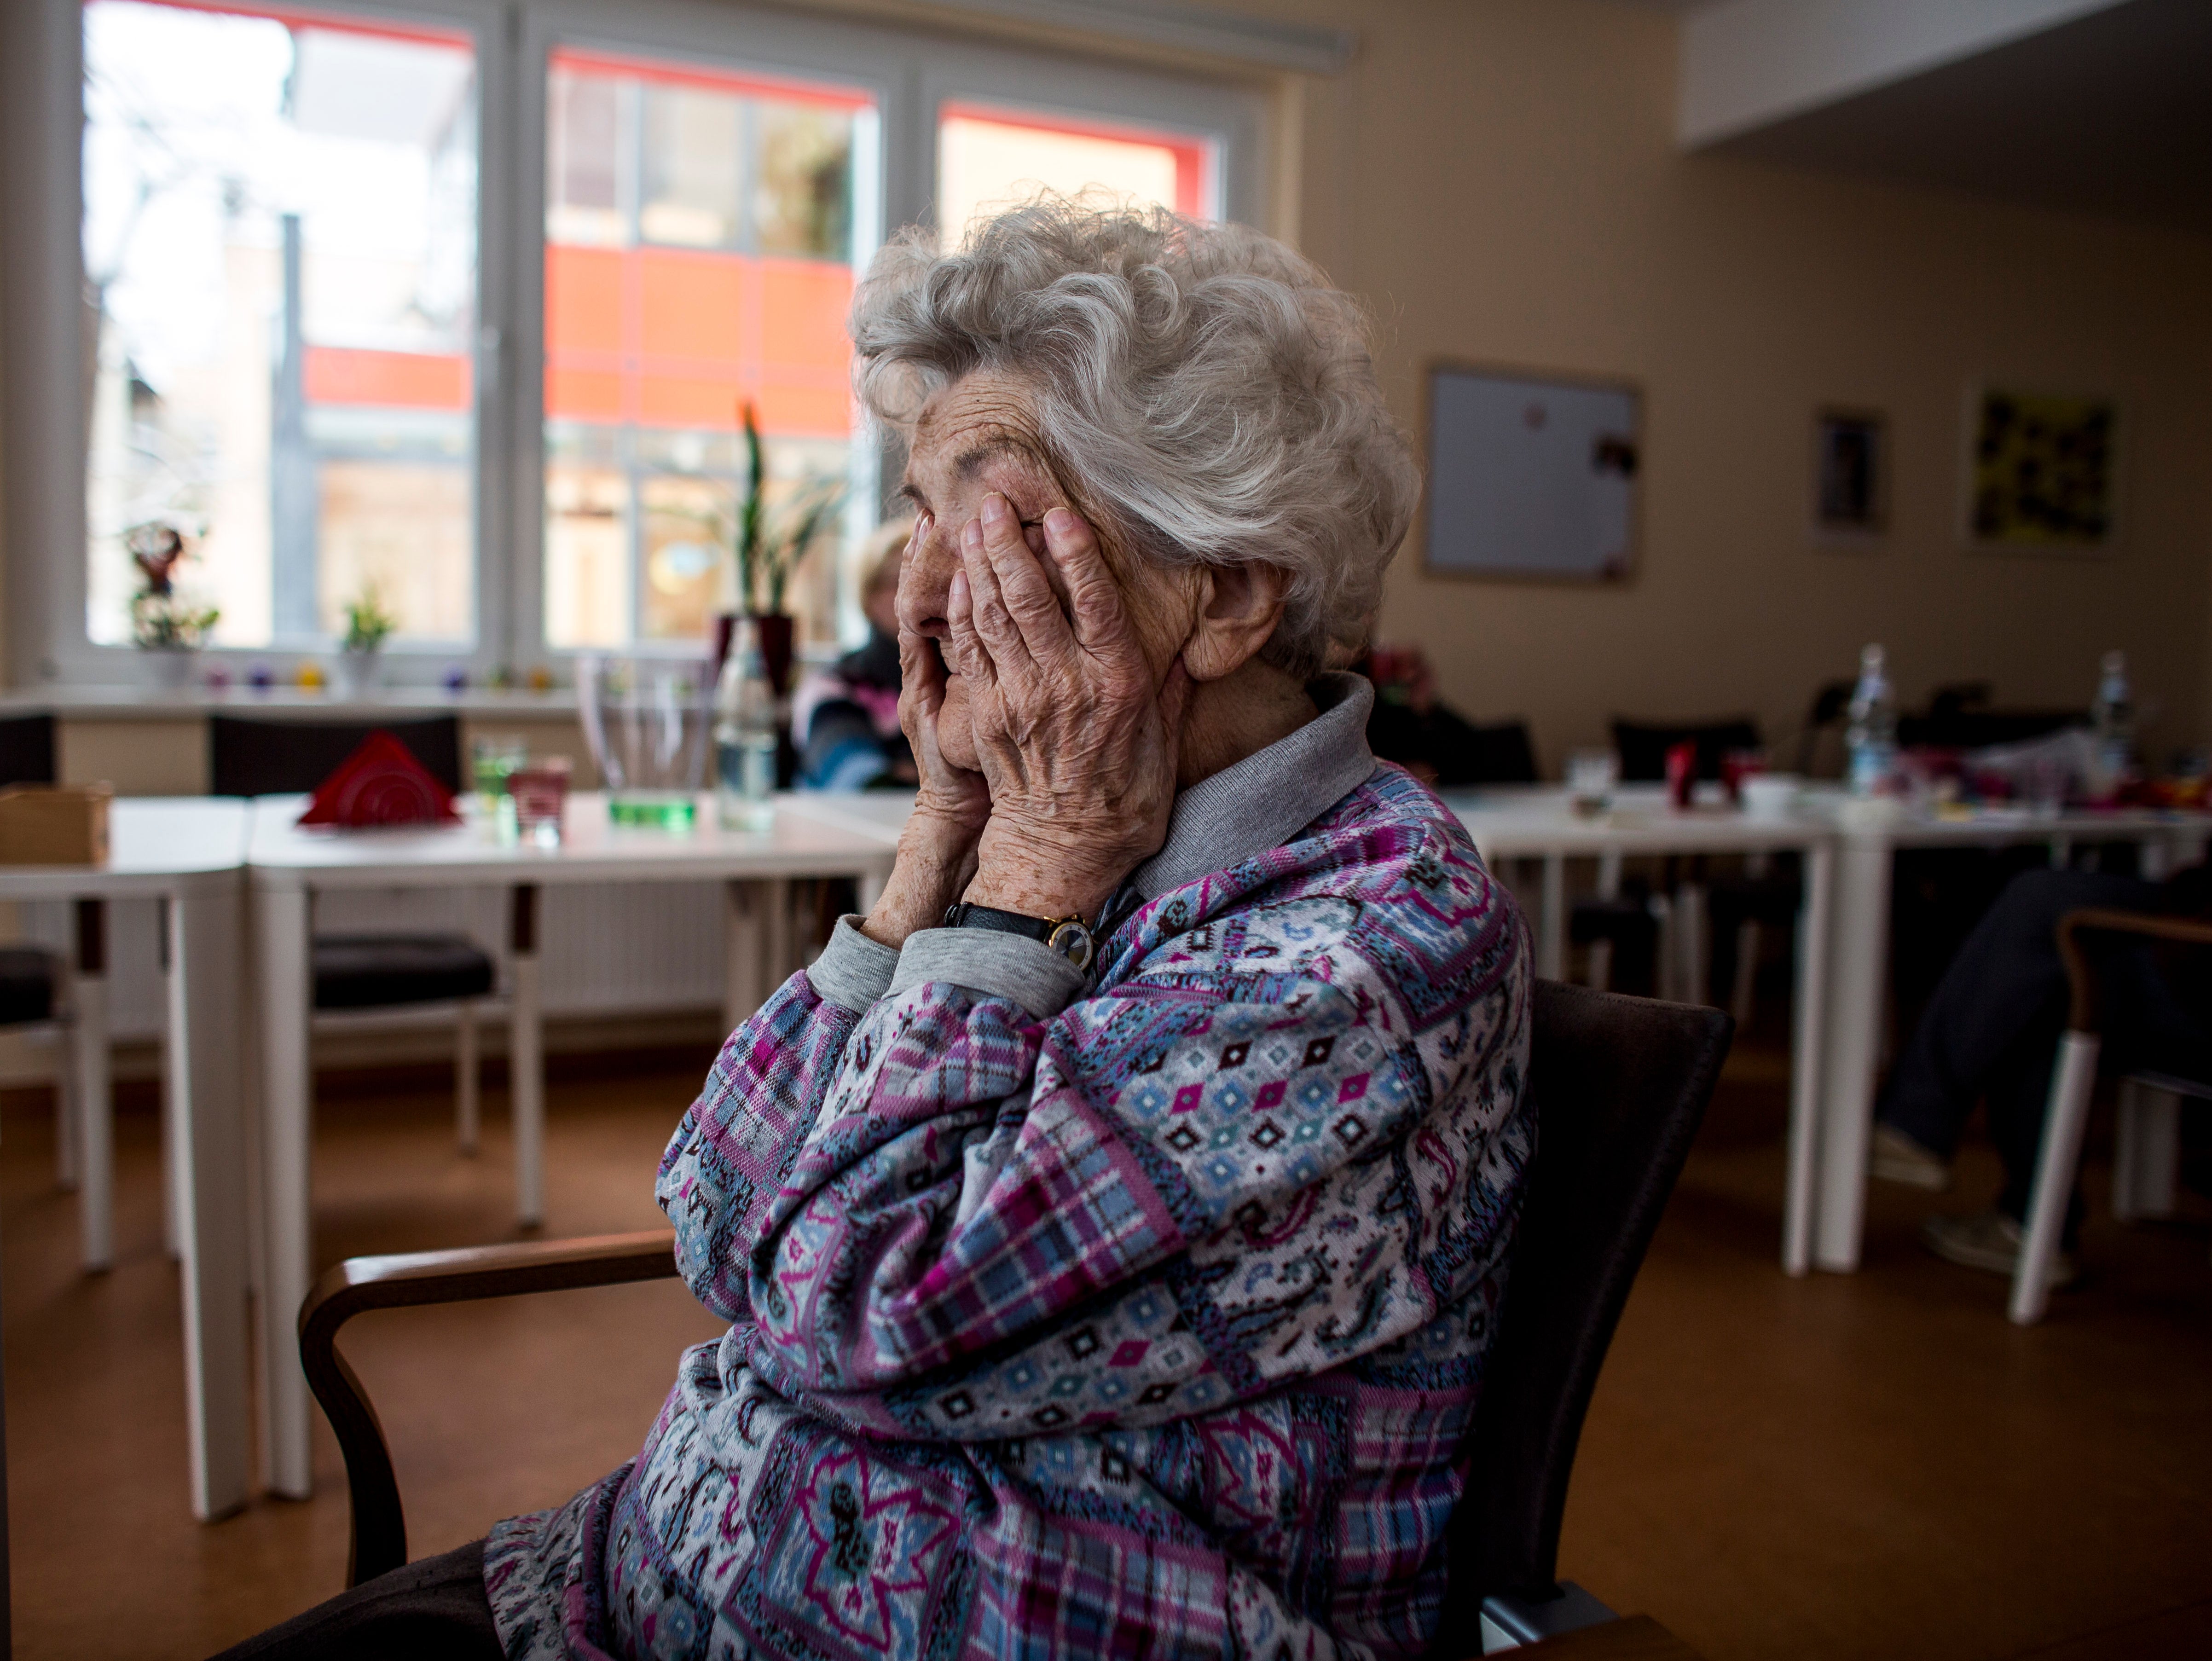 Social care remains a major challenge for the government to resolve